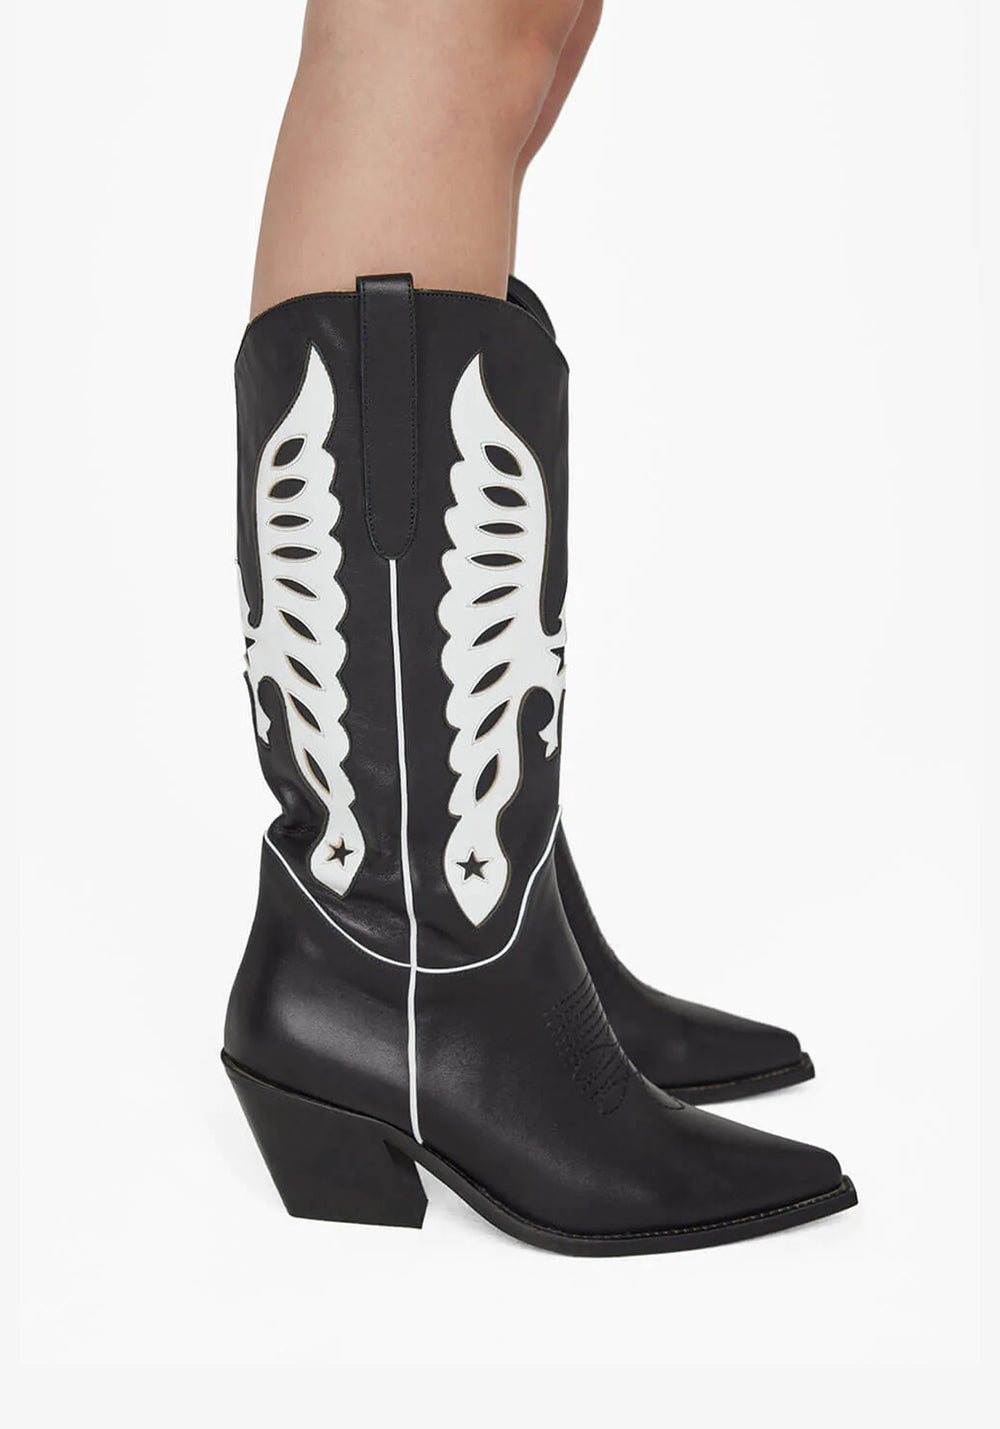 MID CALF TANIA BOOTS BLACK AND WHITE